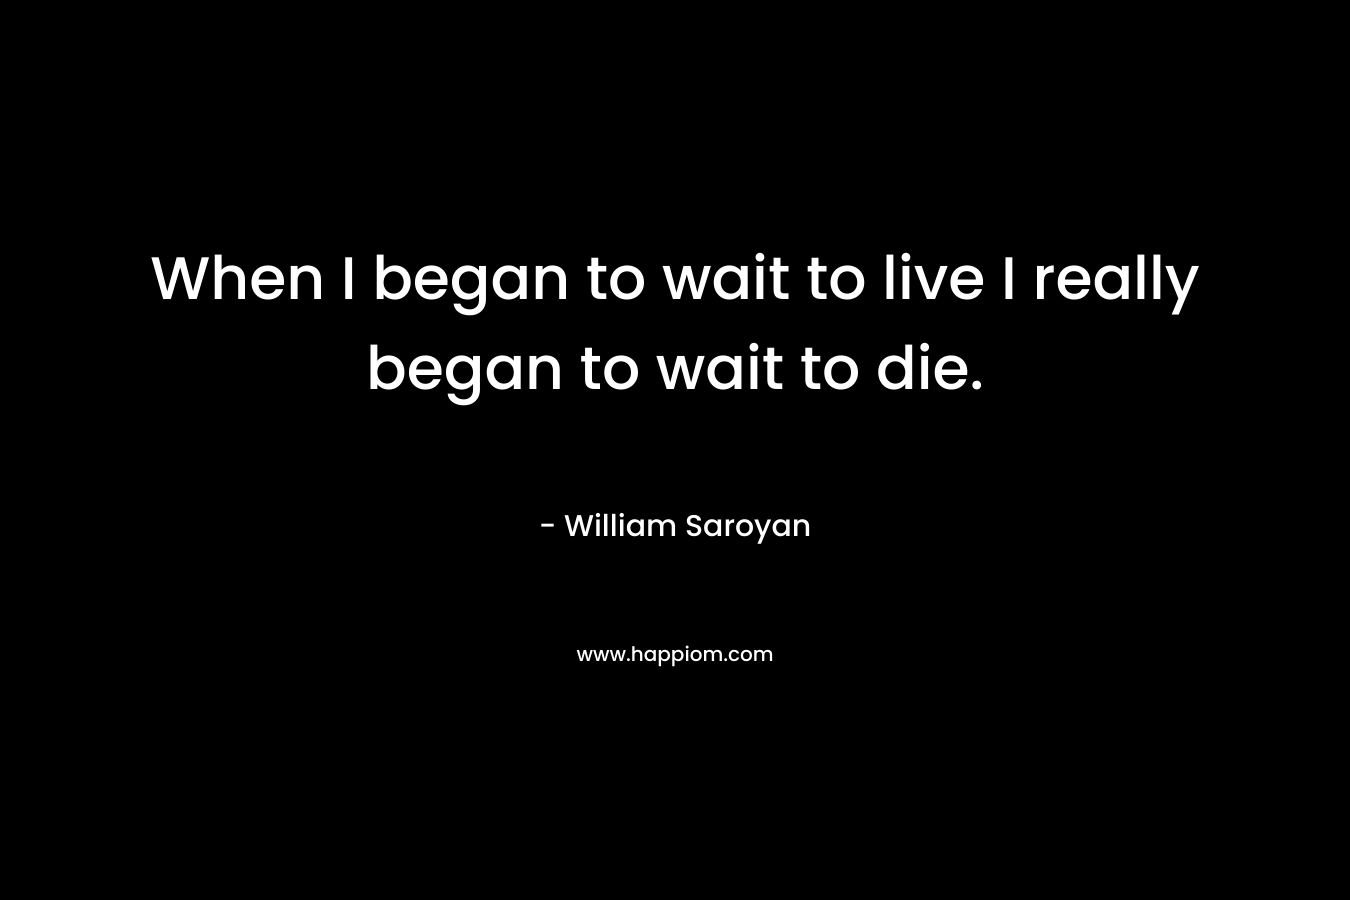 When I began to wait to live I really began to wait to die.